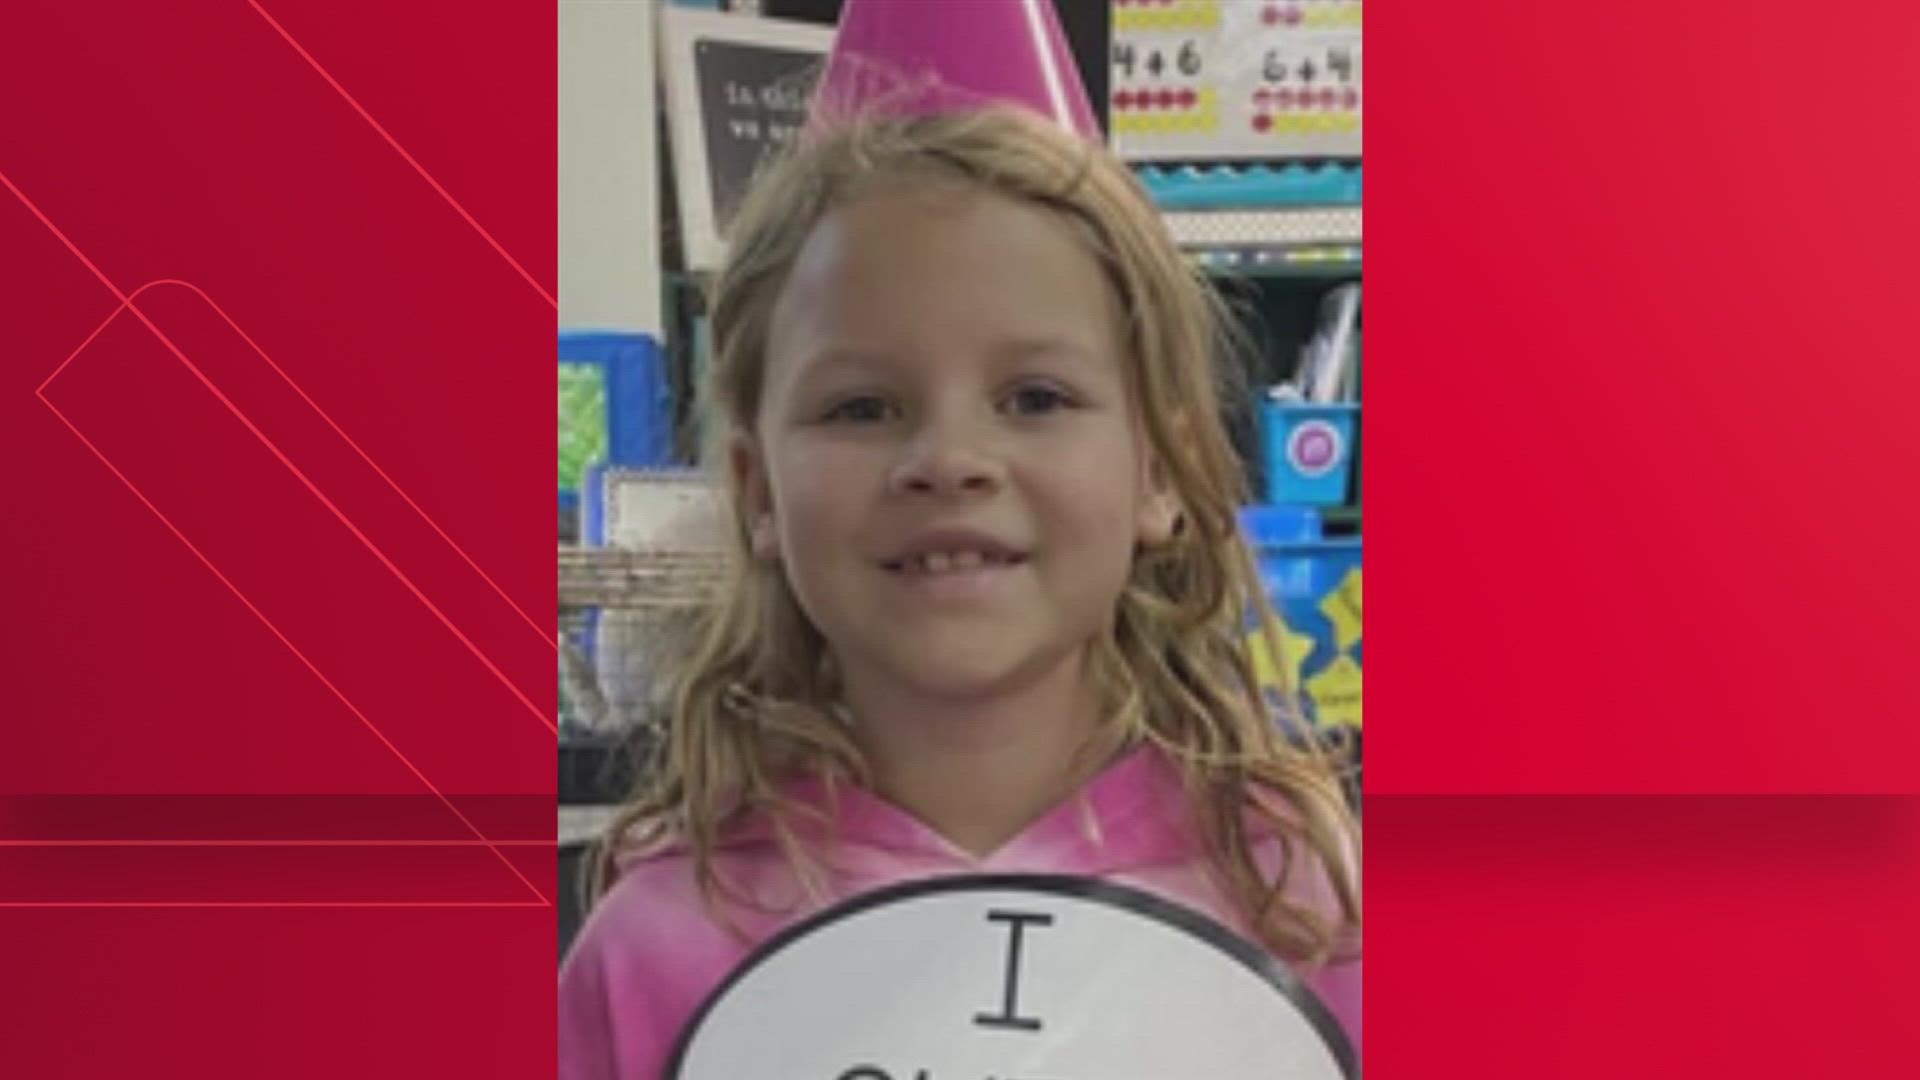 Authorities say Tanner Lynn Horner, a 31-year-old contract FedEx driver, confessed to abducting and killing the missing girl Wednesday afternoon.